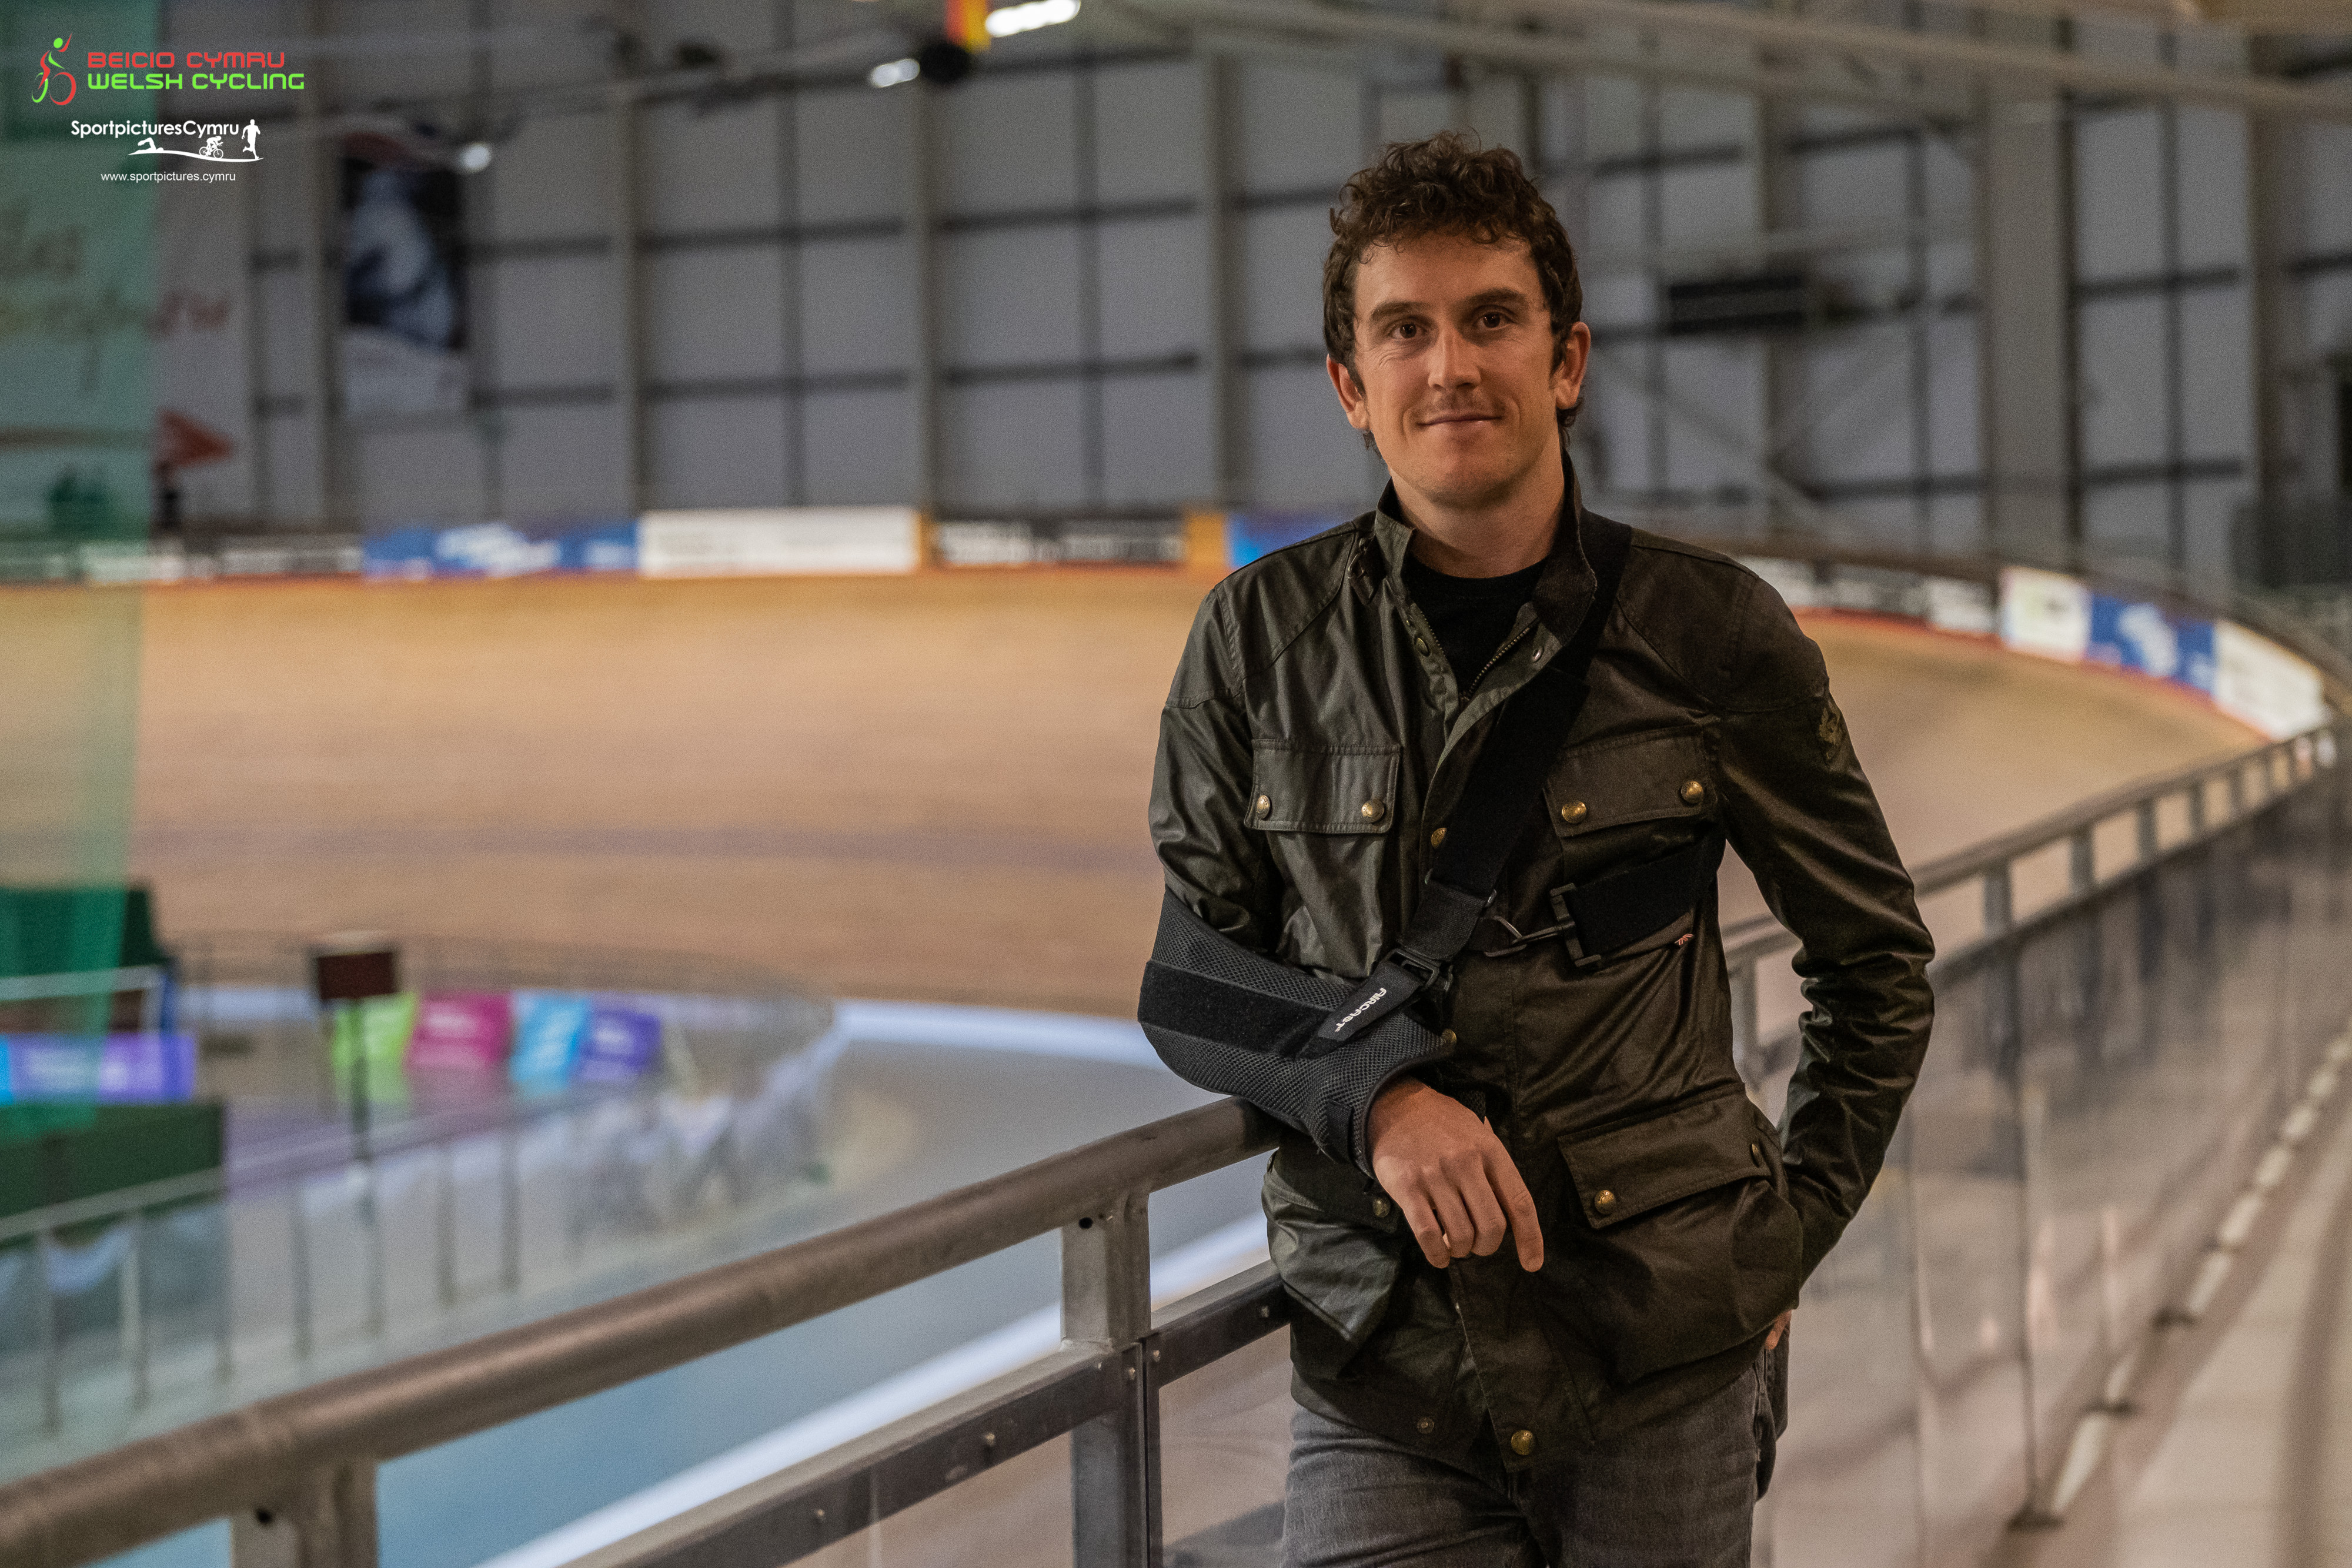 Geraint Thomas leaning against a rail in the velodrome